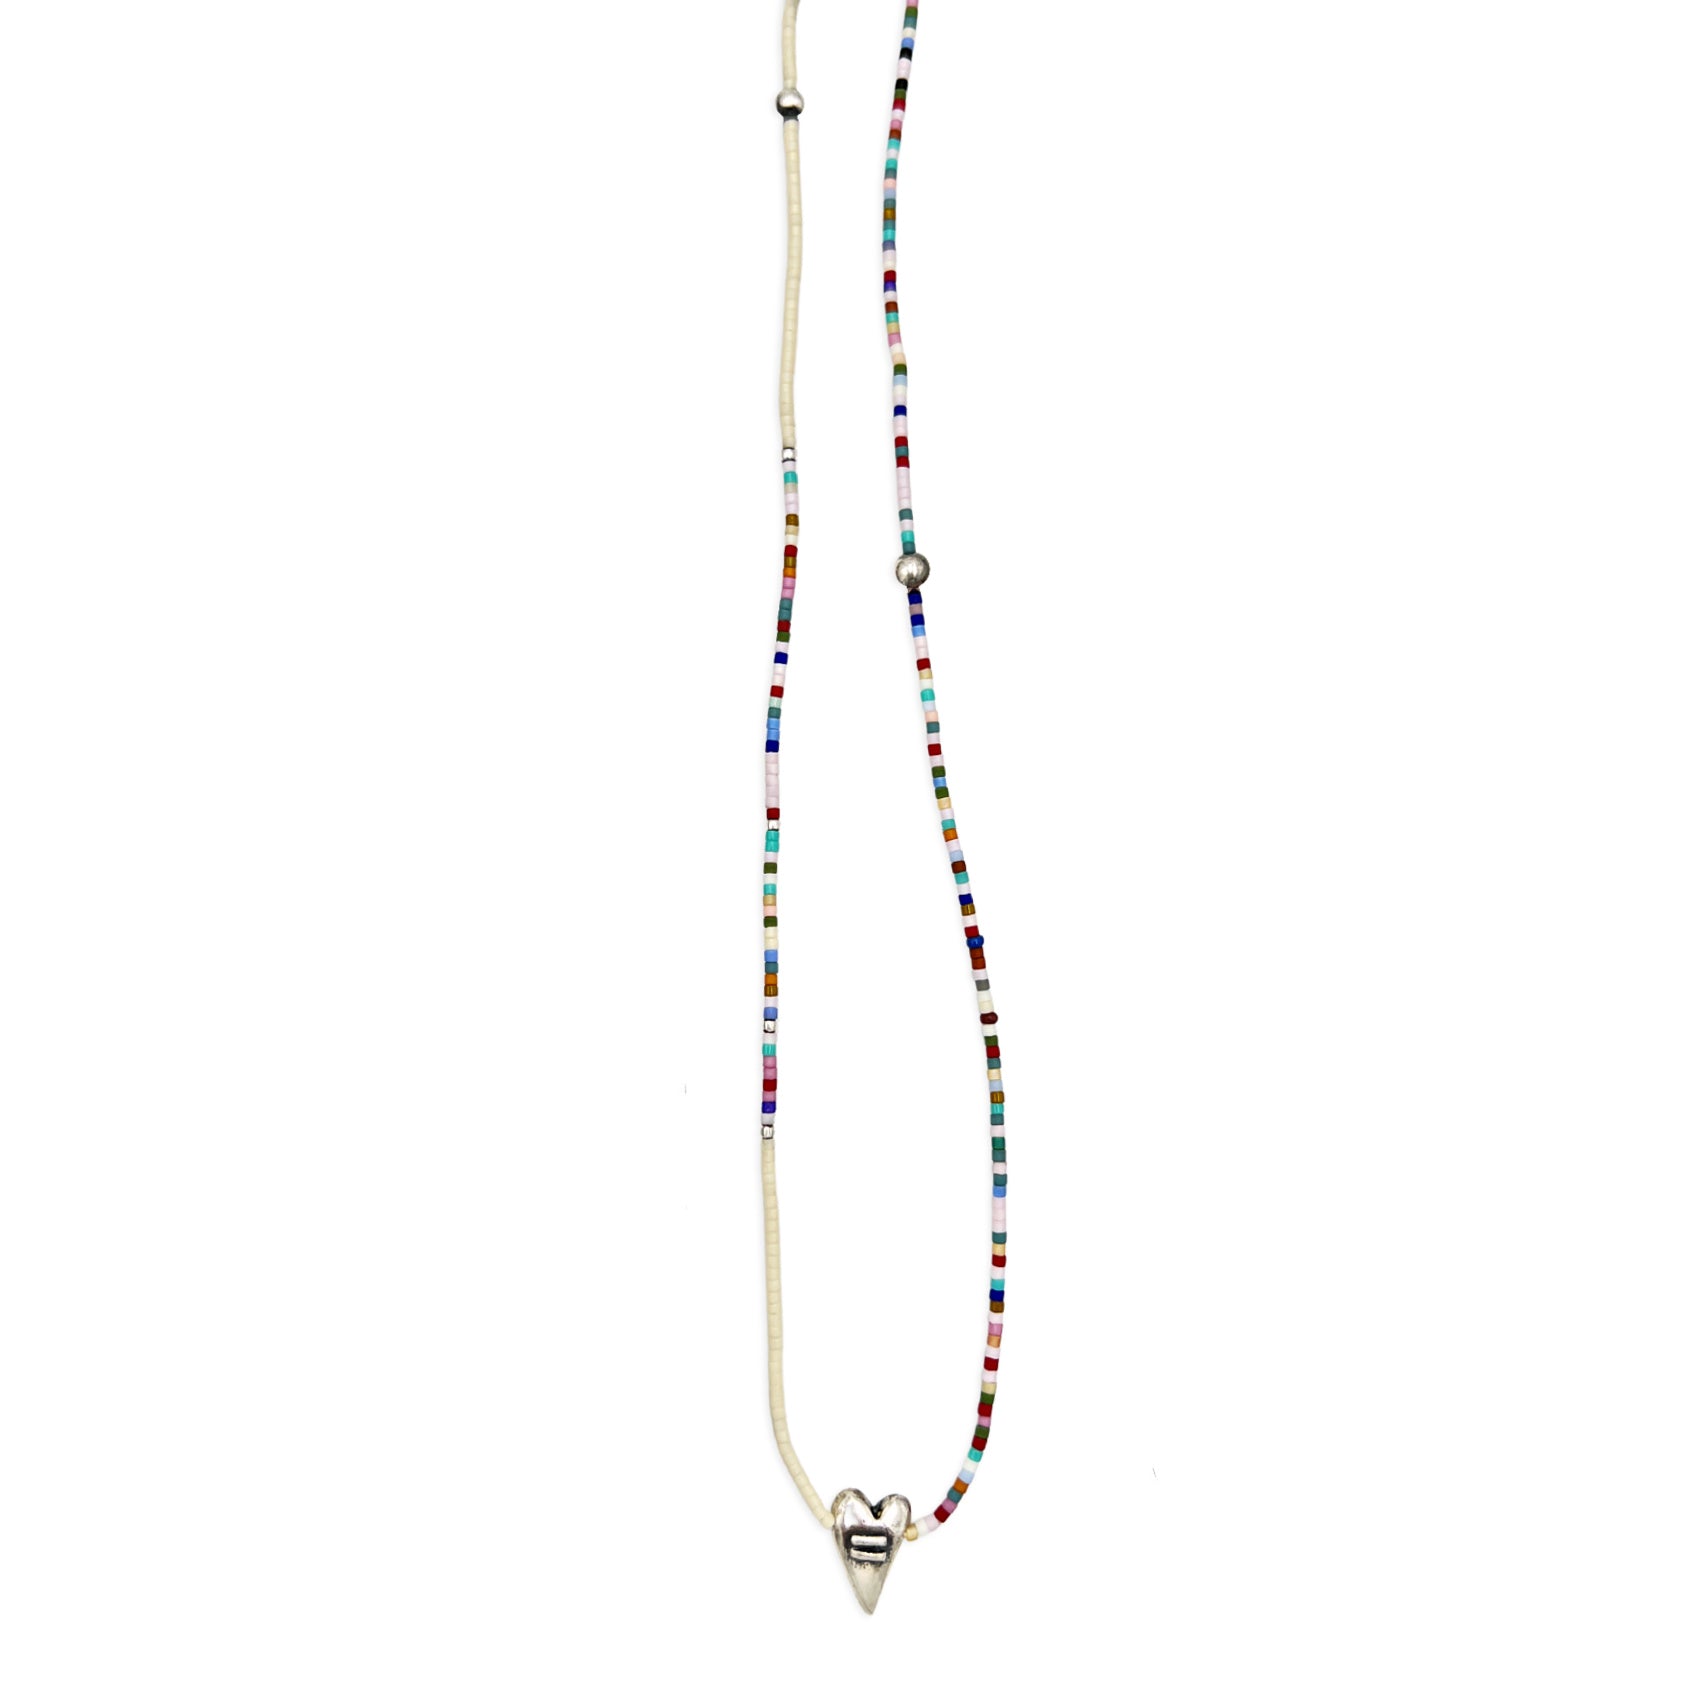 Colorful Beaded Equality Heart Necklace